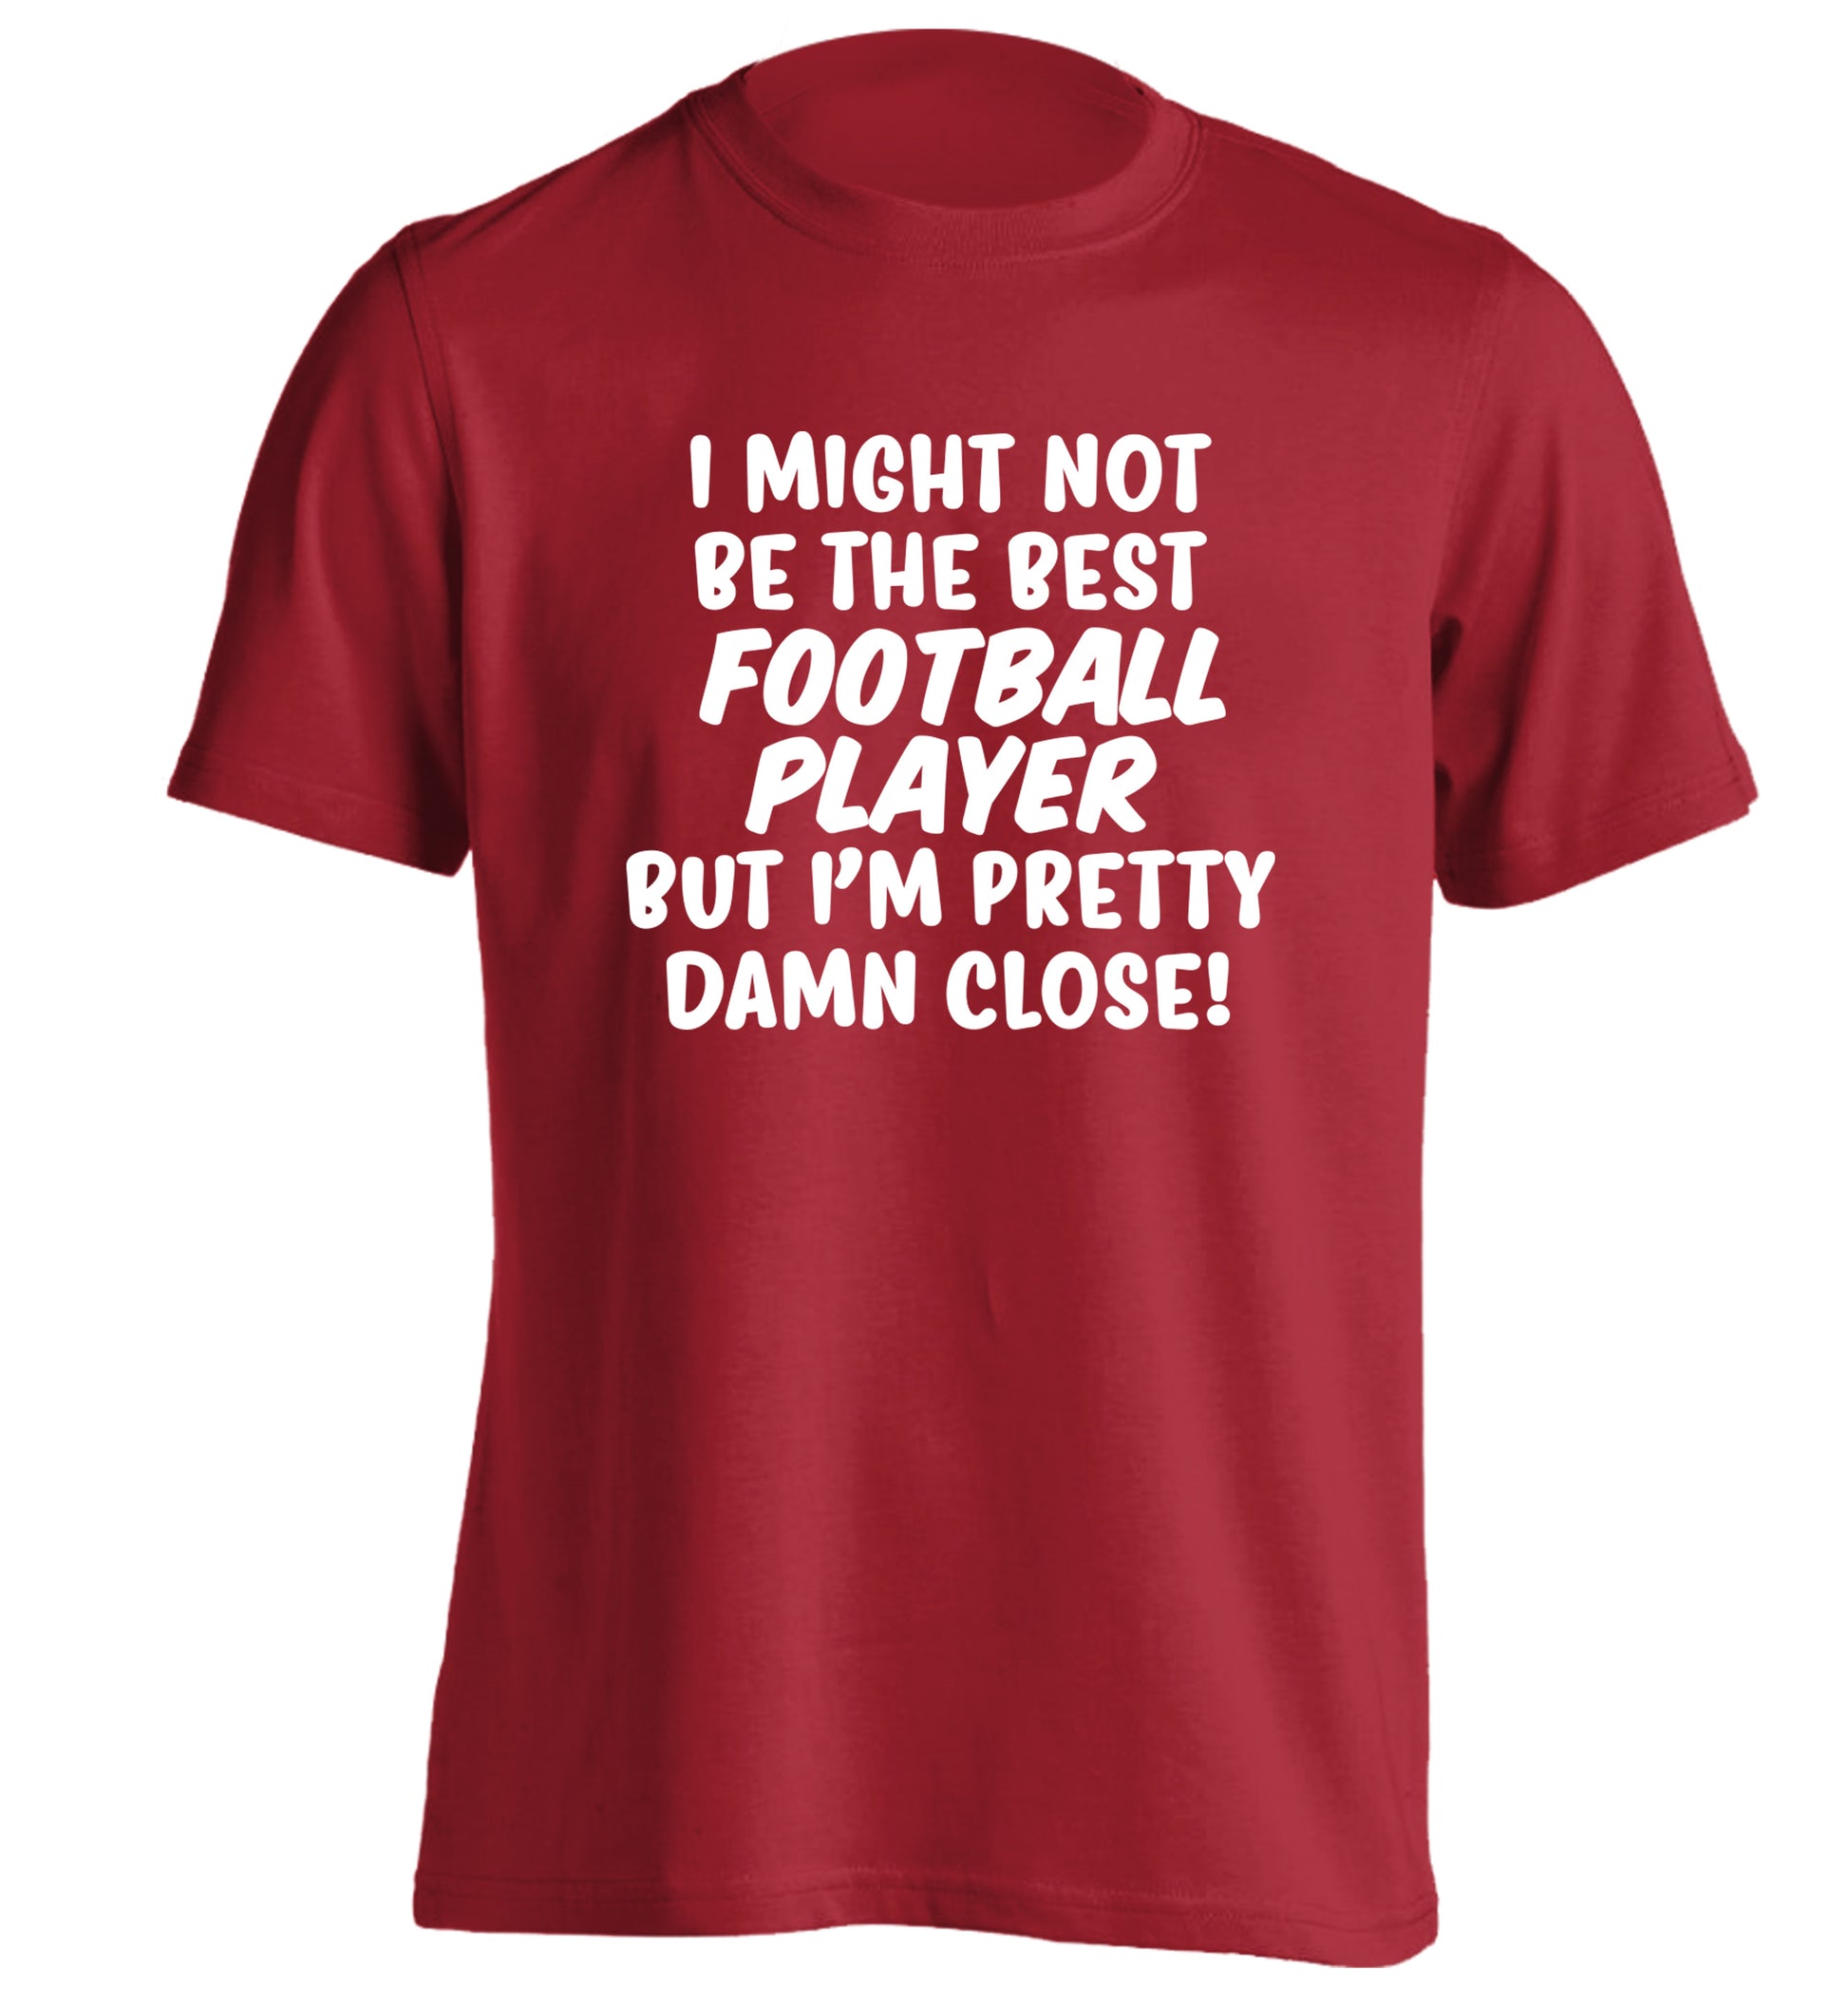 I might not be the best football player but I'm pretty close! adults unisexred Tshirt 2XL